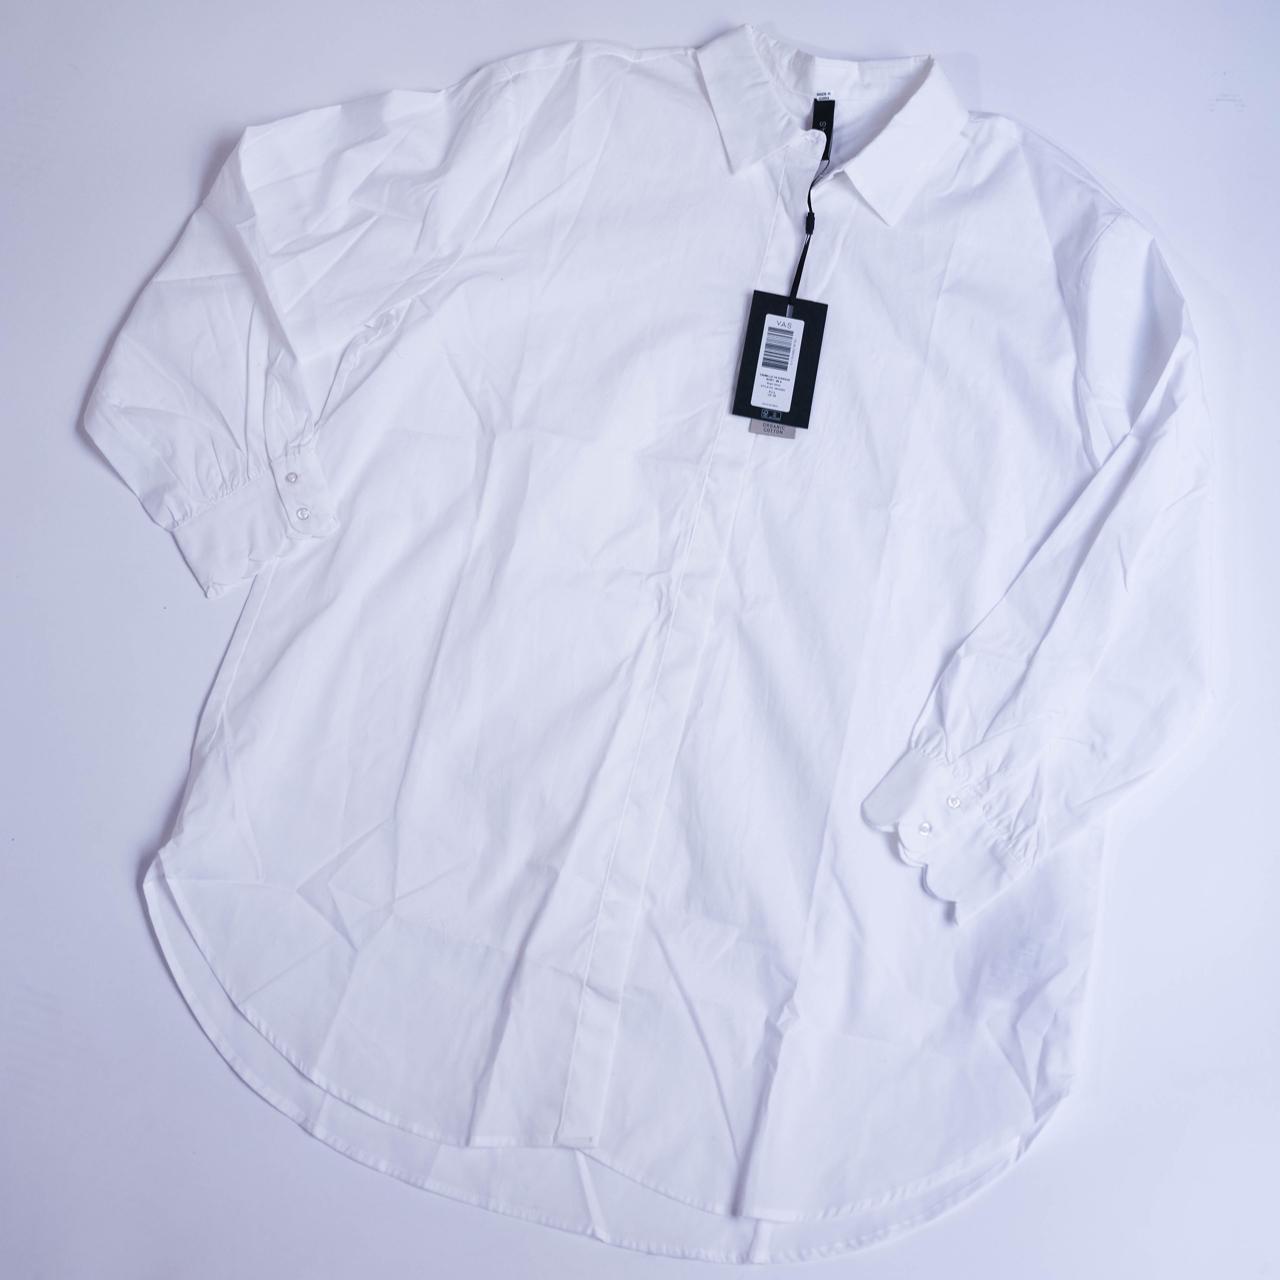 Product Image 1 - Y.A.S Long Sleeve Shirt
NWT.
Scalloped Cuffs.
Size